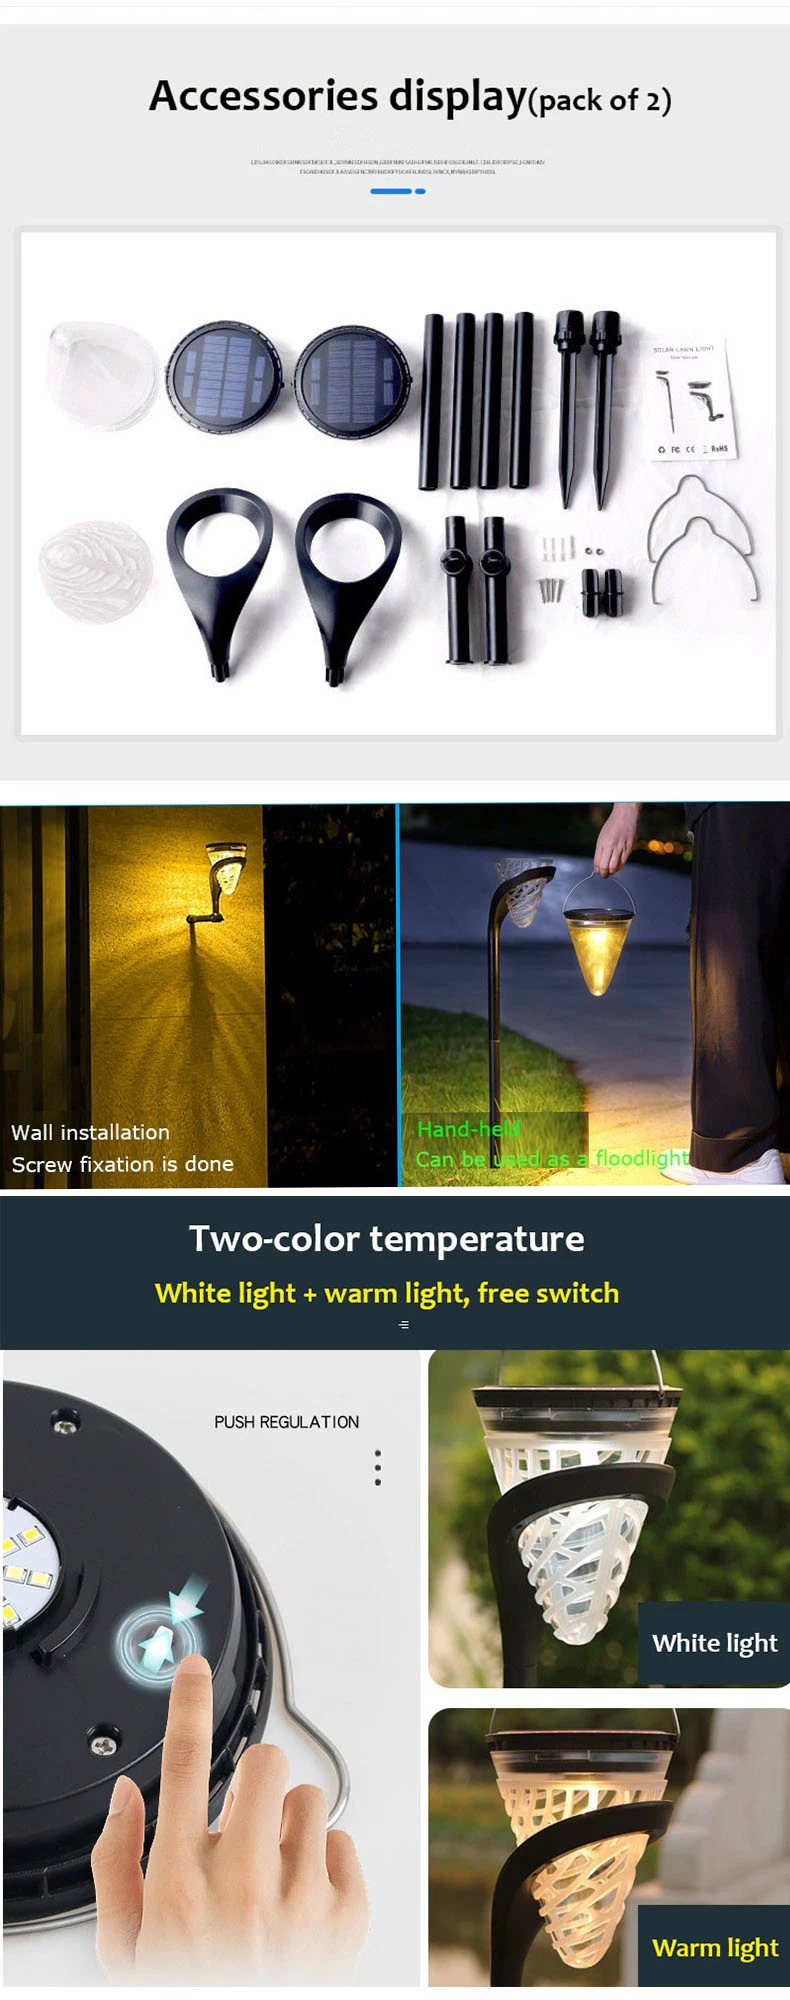 Super Bright Solar Lights Outdoor Waterproof 2pack, Dusk to Dawn up to 10 Hrs Solar Powered Outdoor Pathway Garden Lights Auto on/off, LED Landscape Lighting